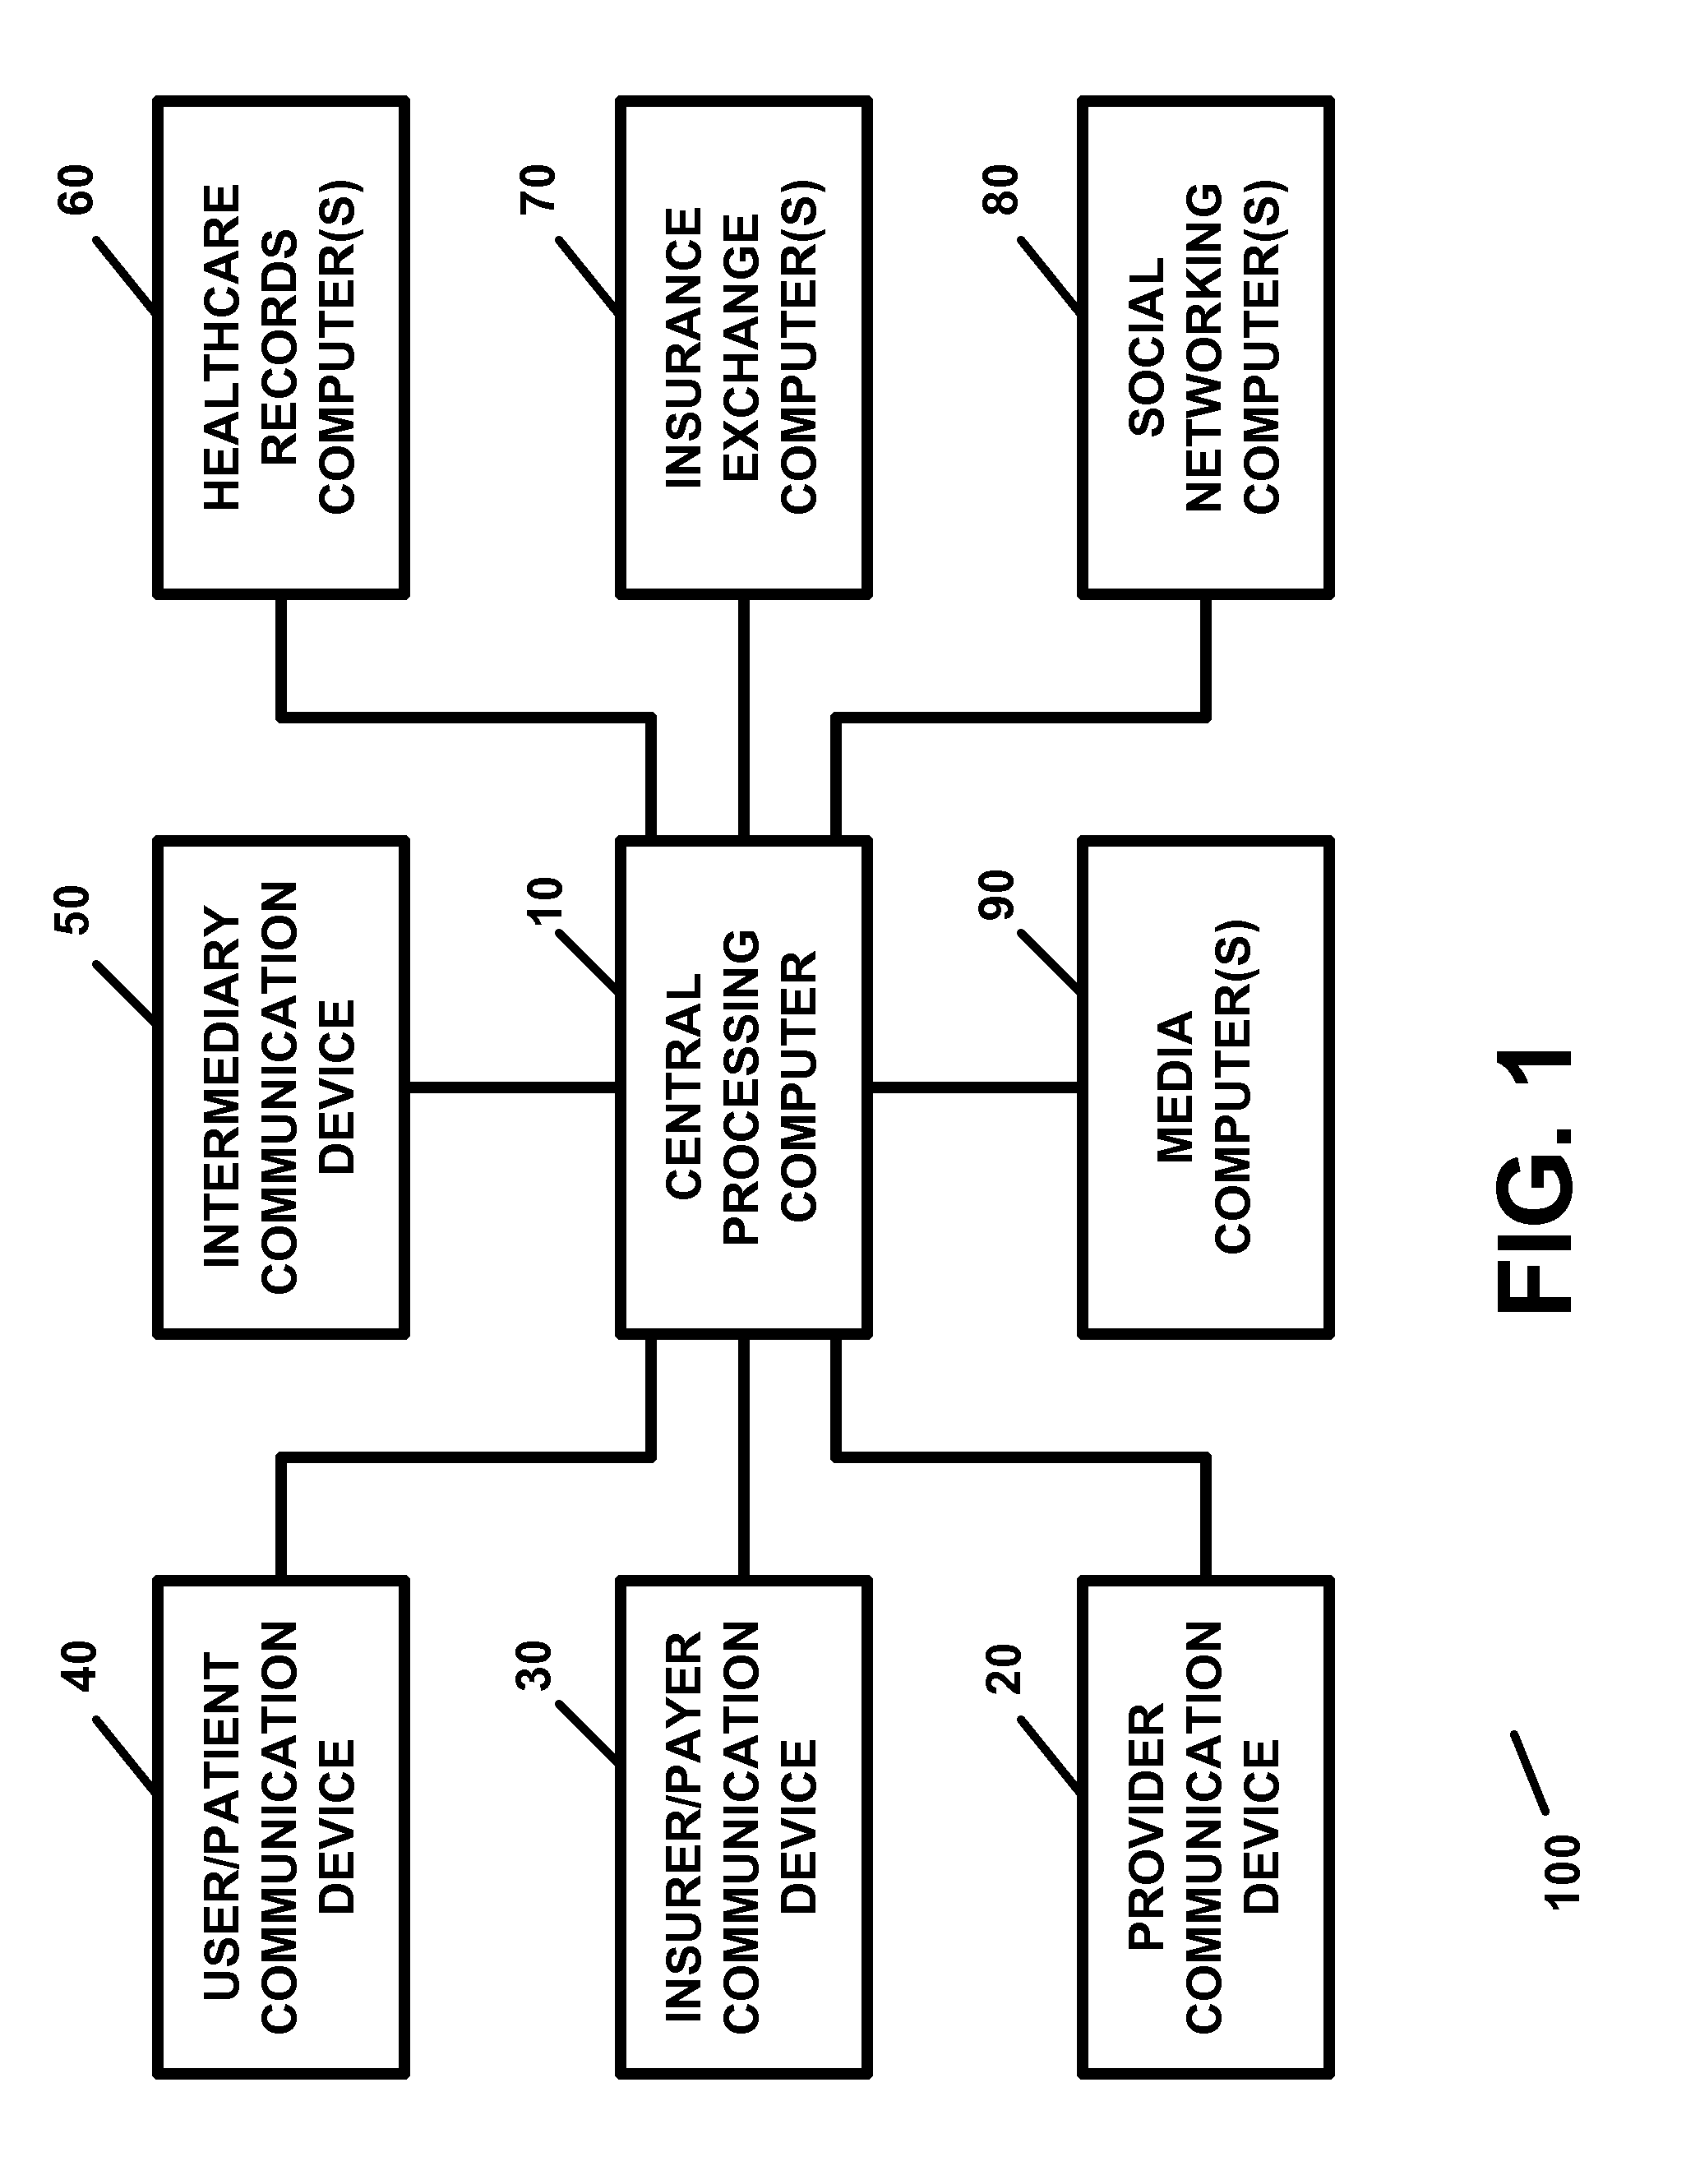 Apparatus and method for processing and/or for providing healthcare information and/or healthcare-related information with or using an electronic healthcare record and genetic information and/or genetic-related information